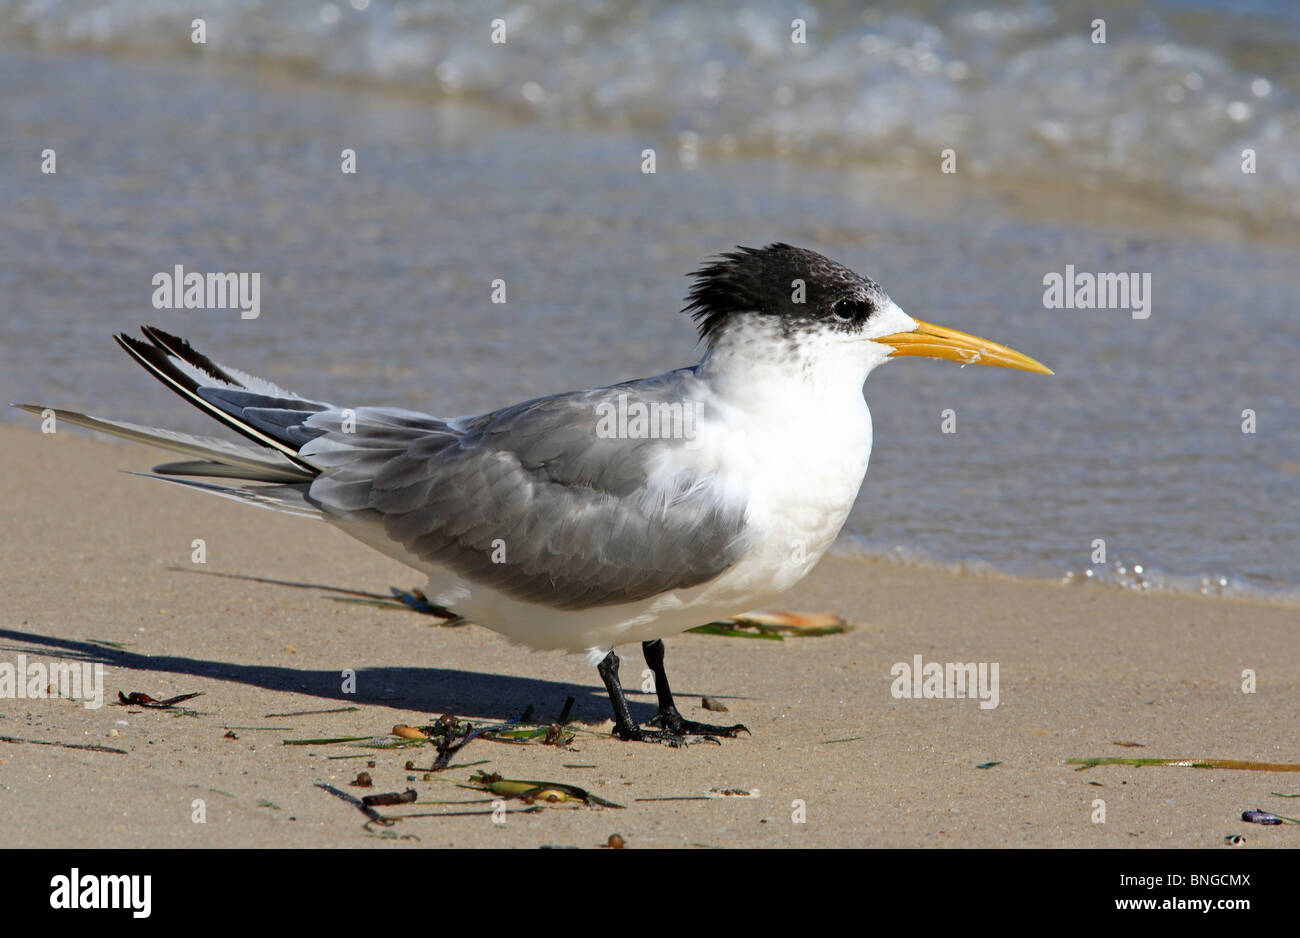 Greater Crested Tern, Thalasseus bergii, (previously Sterna bergii), on the beach, Stock Photo